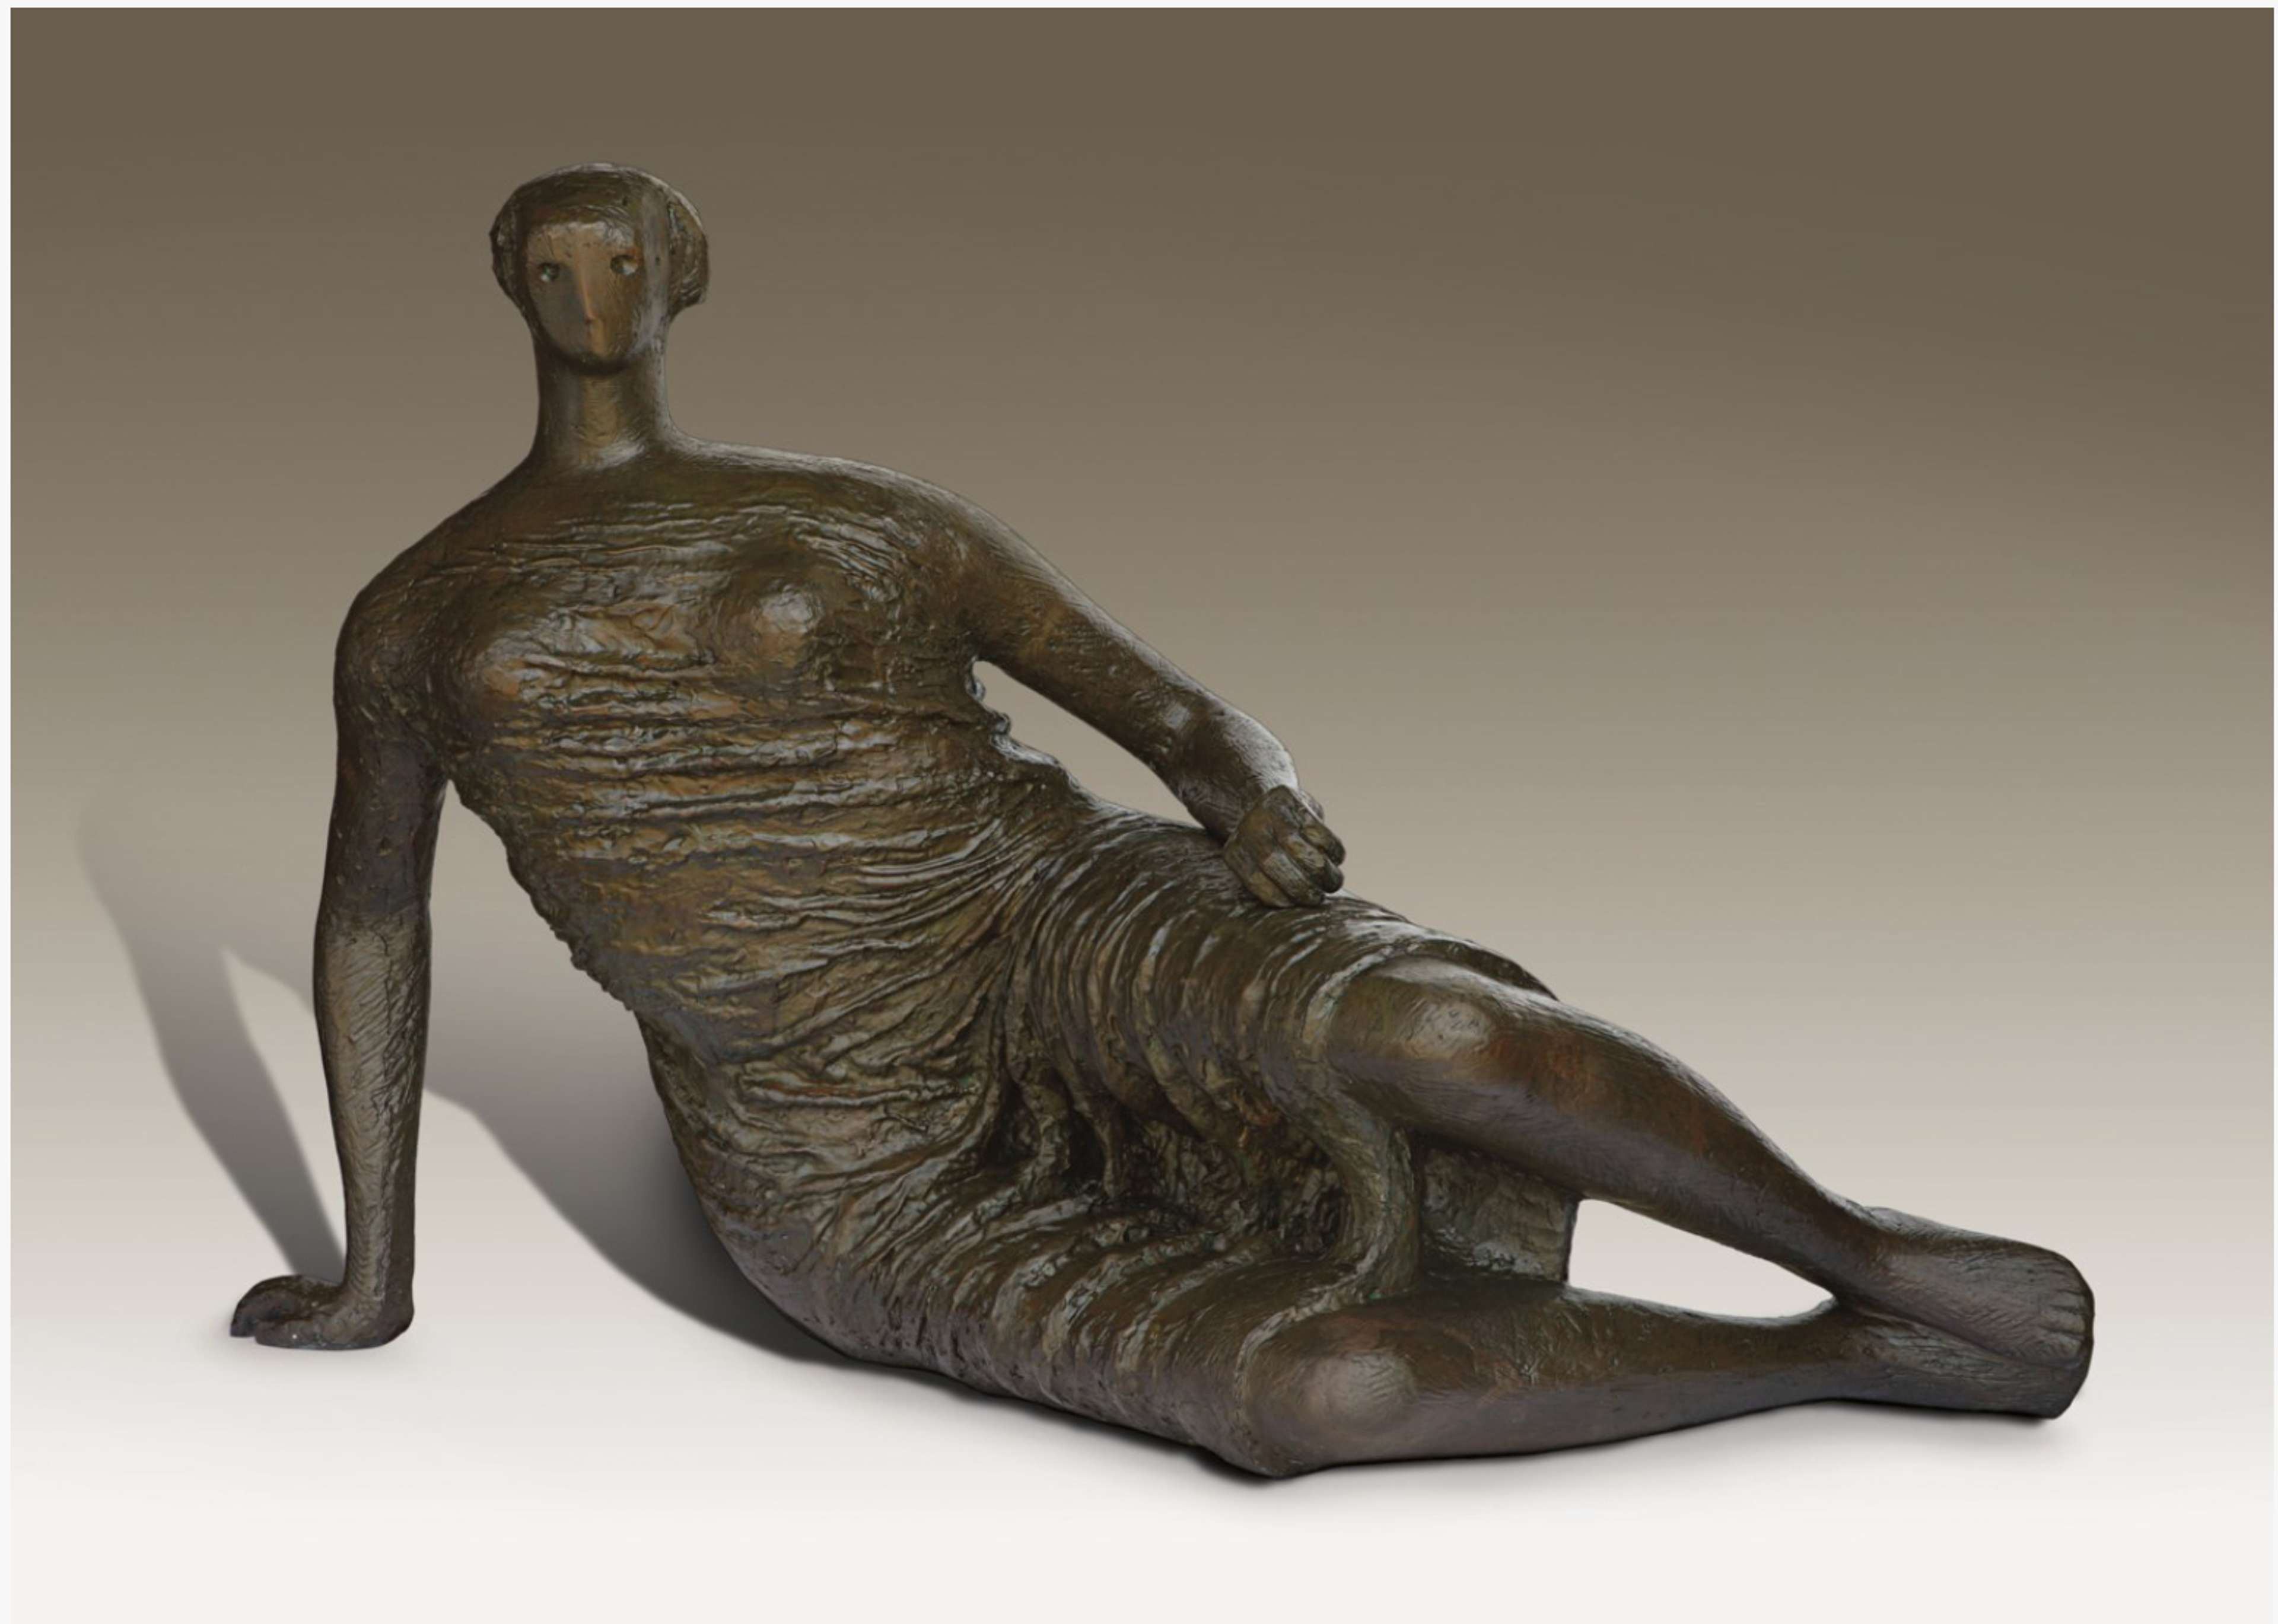 A sculpture by Henry Moore featuring a seated woman. The woman is depicted resting on the side of her thigh, with one arm on her hip and the other supporting her weight by being planted in the ground. The sculpture highlights prominent protruding breasts and showcases a crinkled drapery that resembles a dress, enveloping the body.